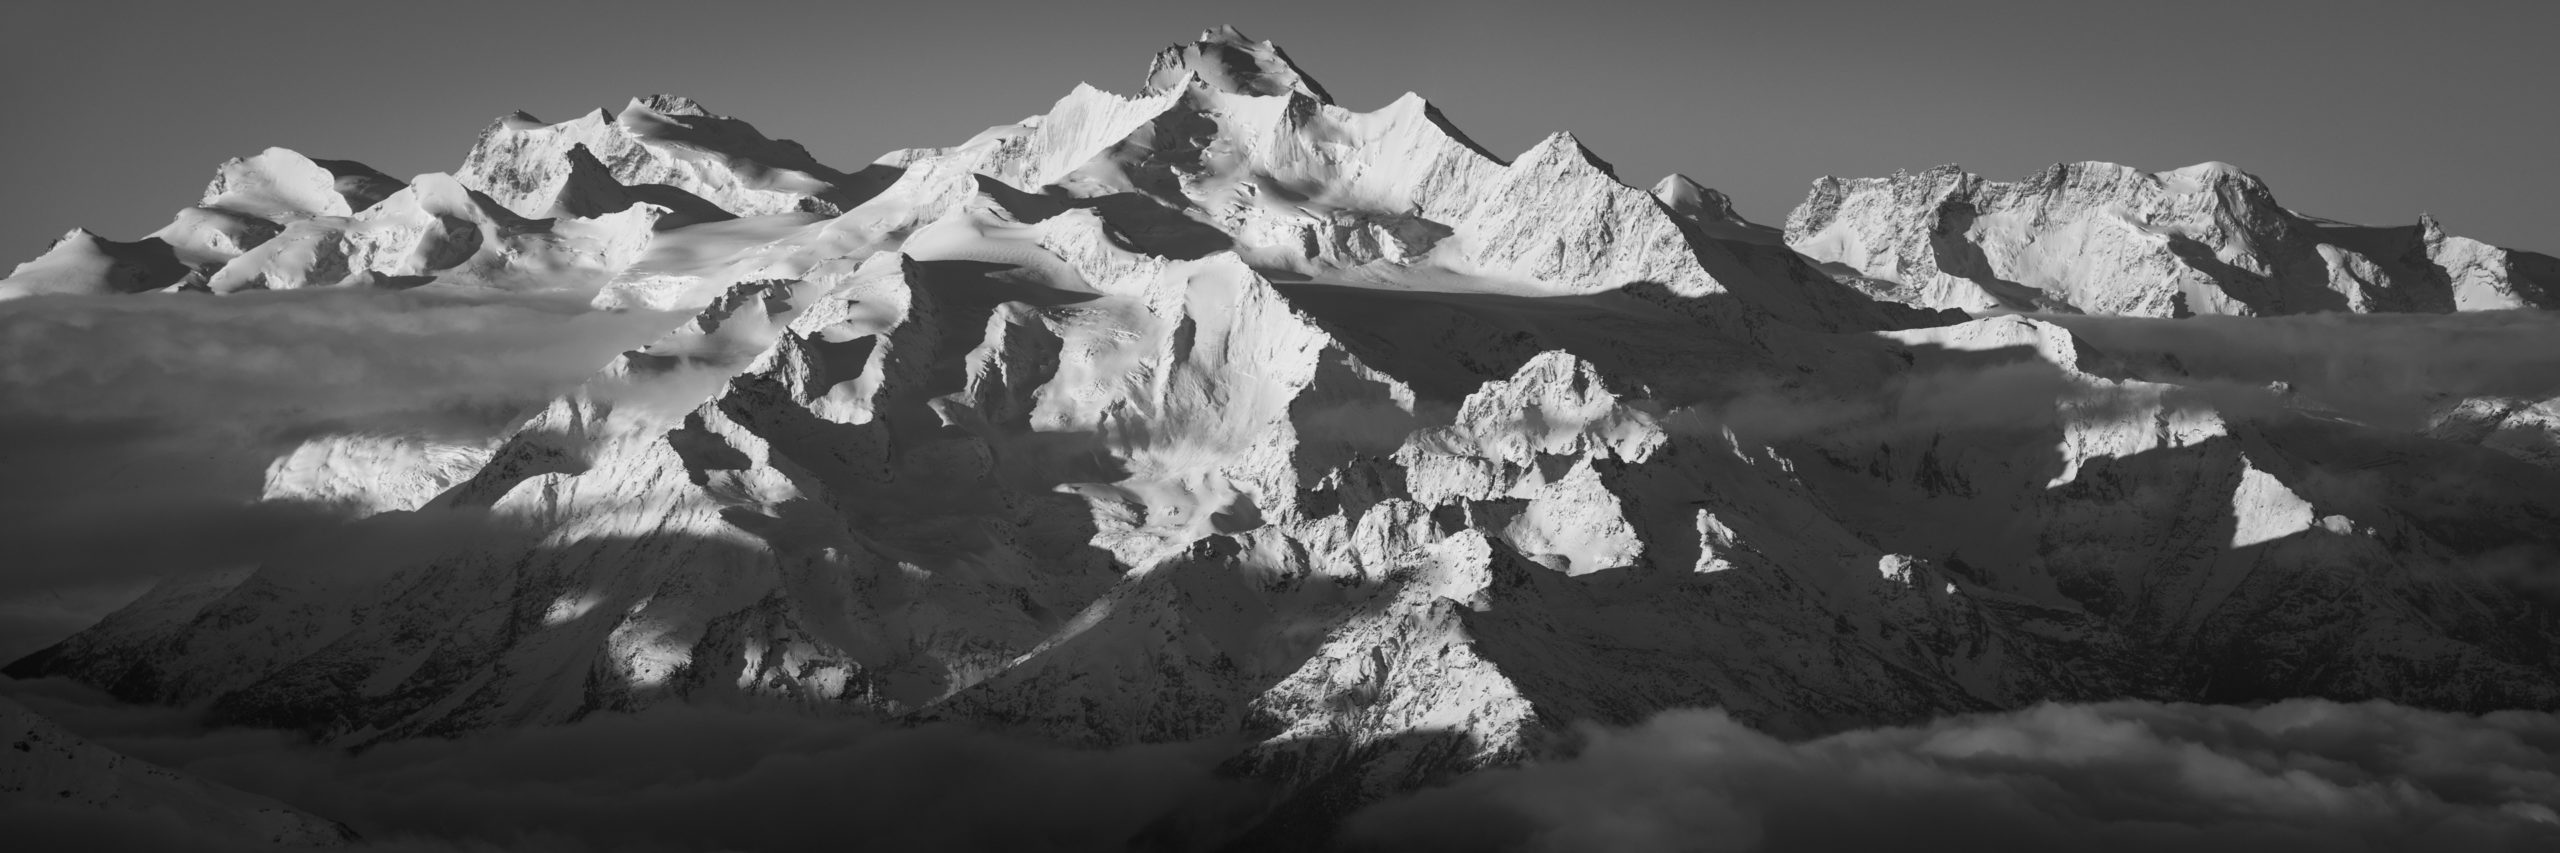 panoramic image of the mountains of Saas Fee - Panoramic view of the Mischabels - Panorama of the Monte Rosa from Breithorn above Zermatt